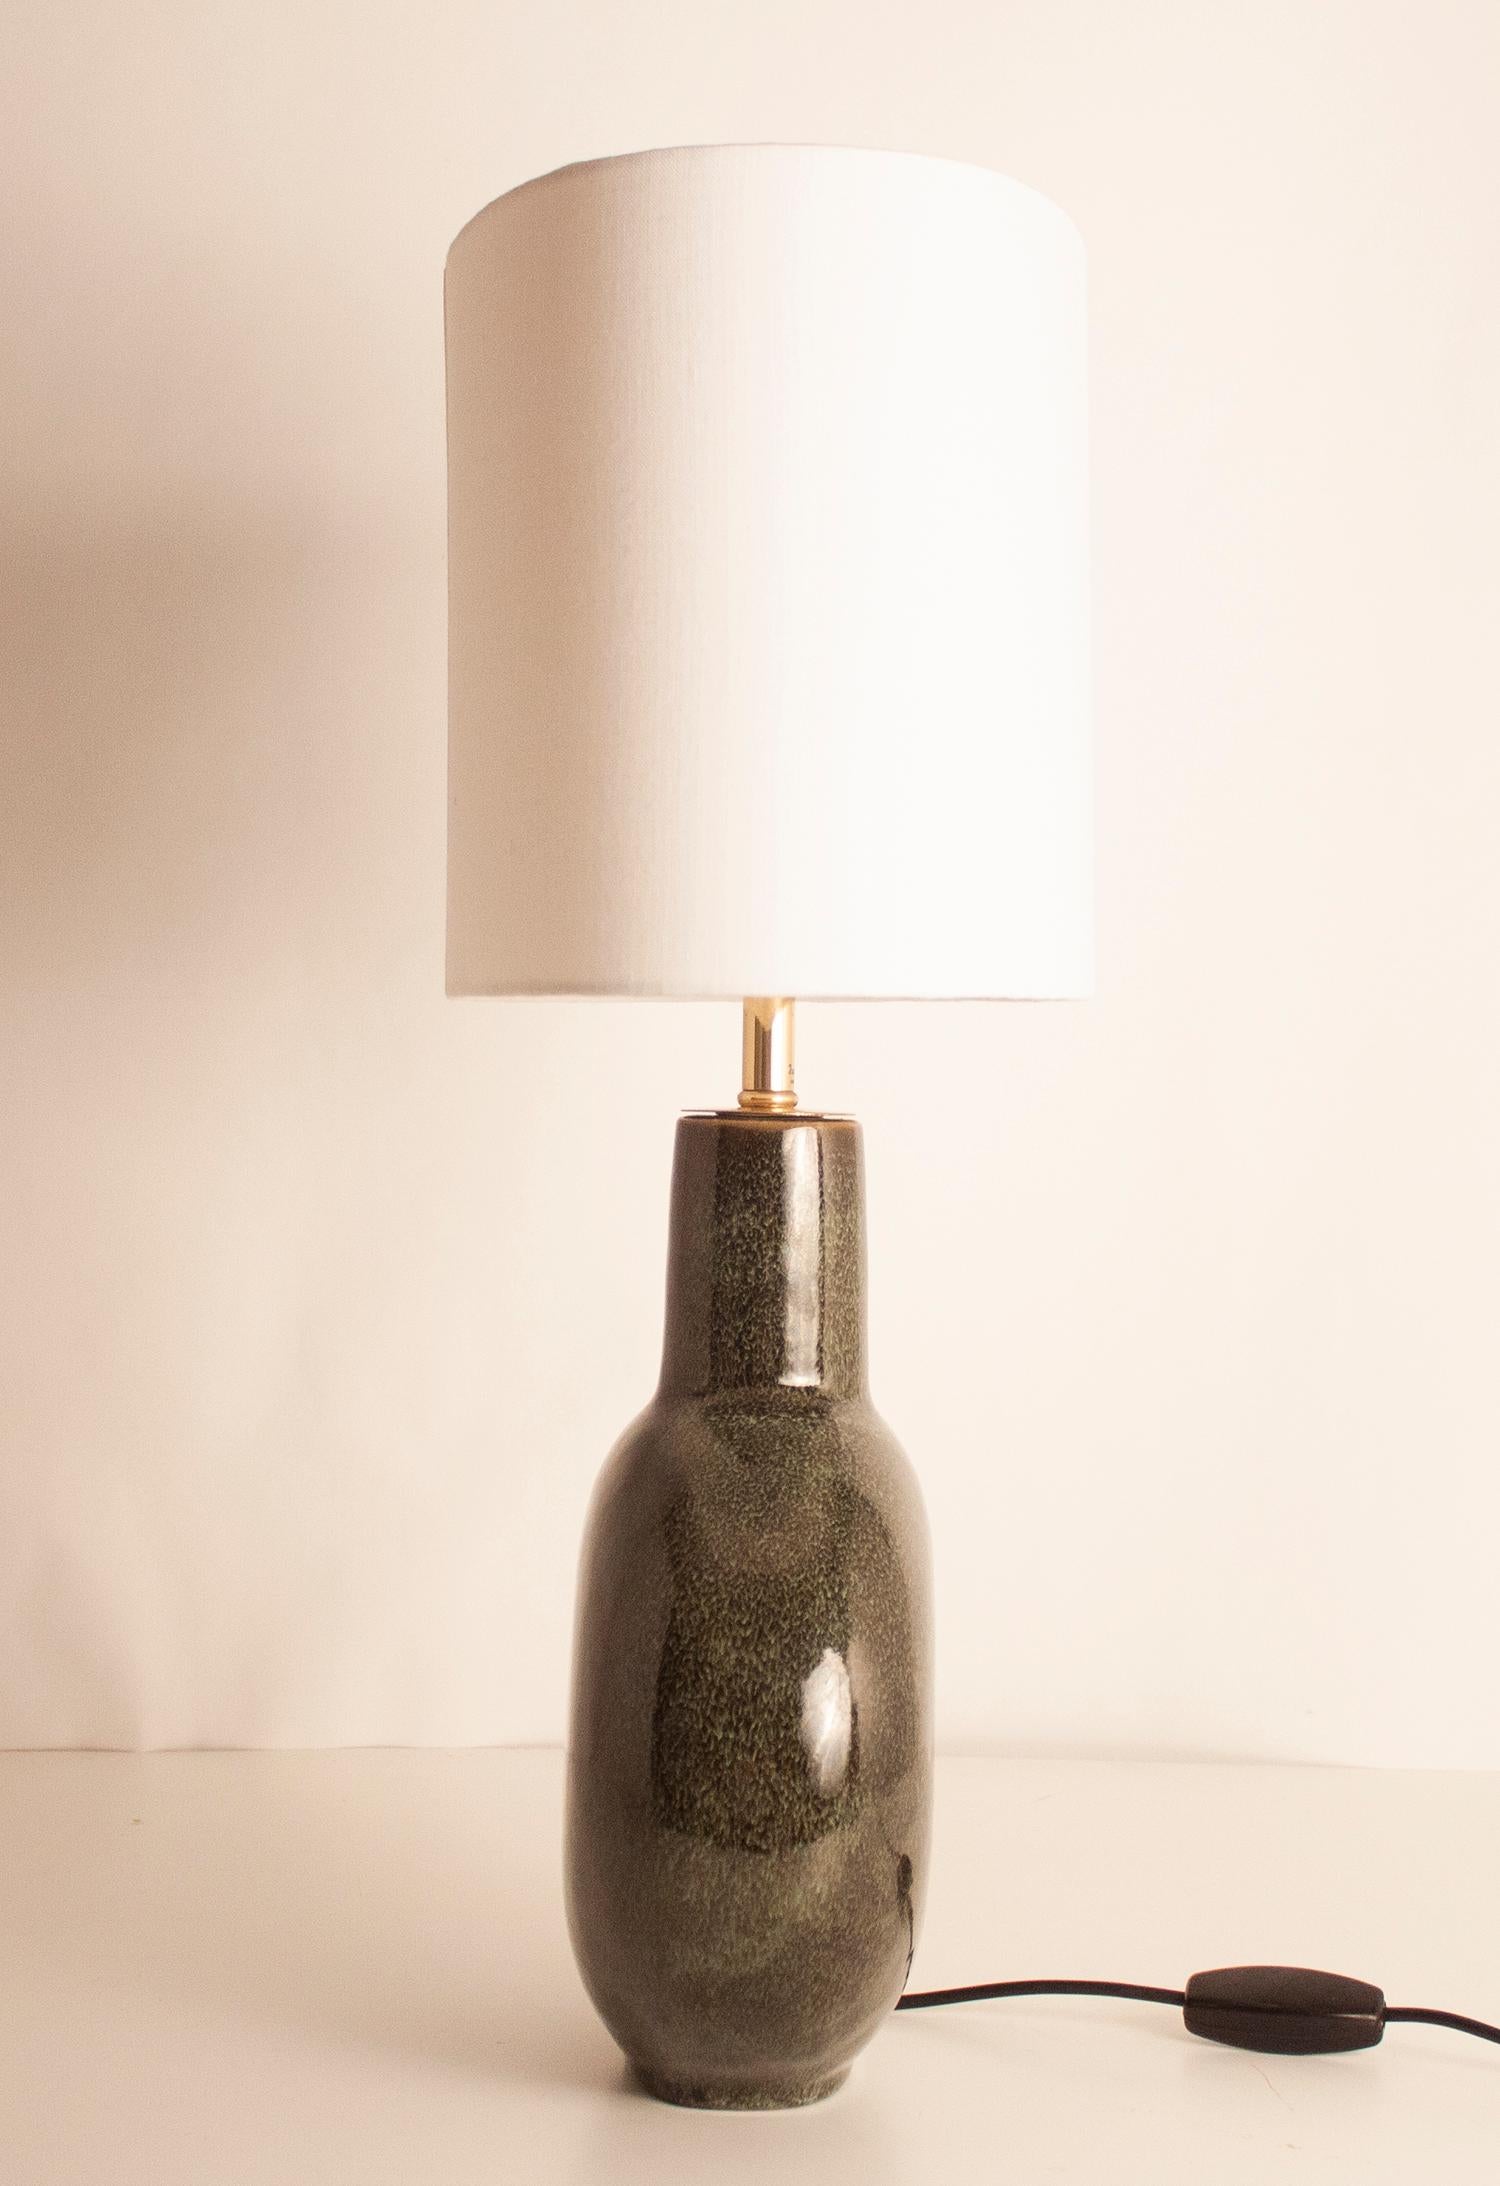 Mid-century Modern, Green Ceramic and Brass Table Lamp by Valenti, Spain 1970s For Sale 3